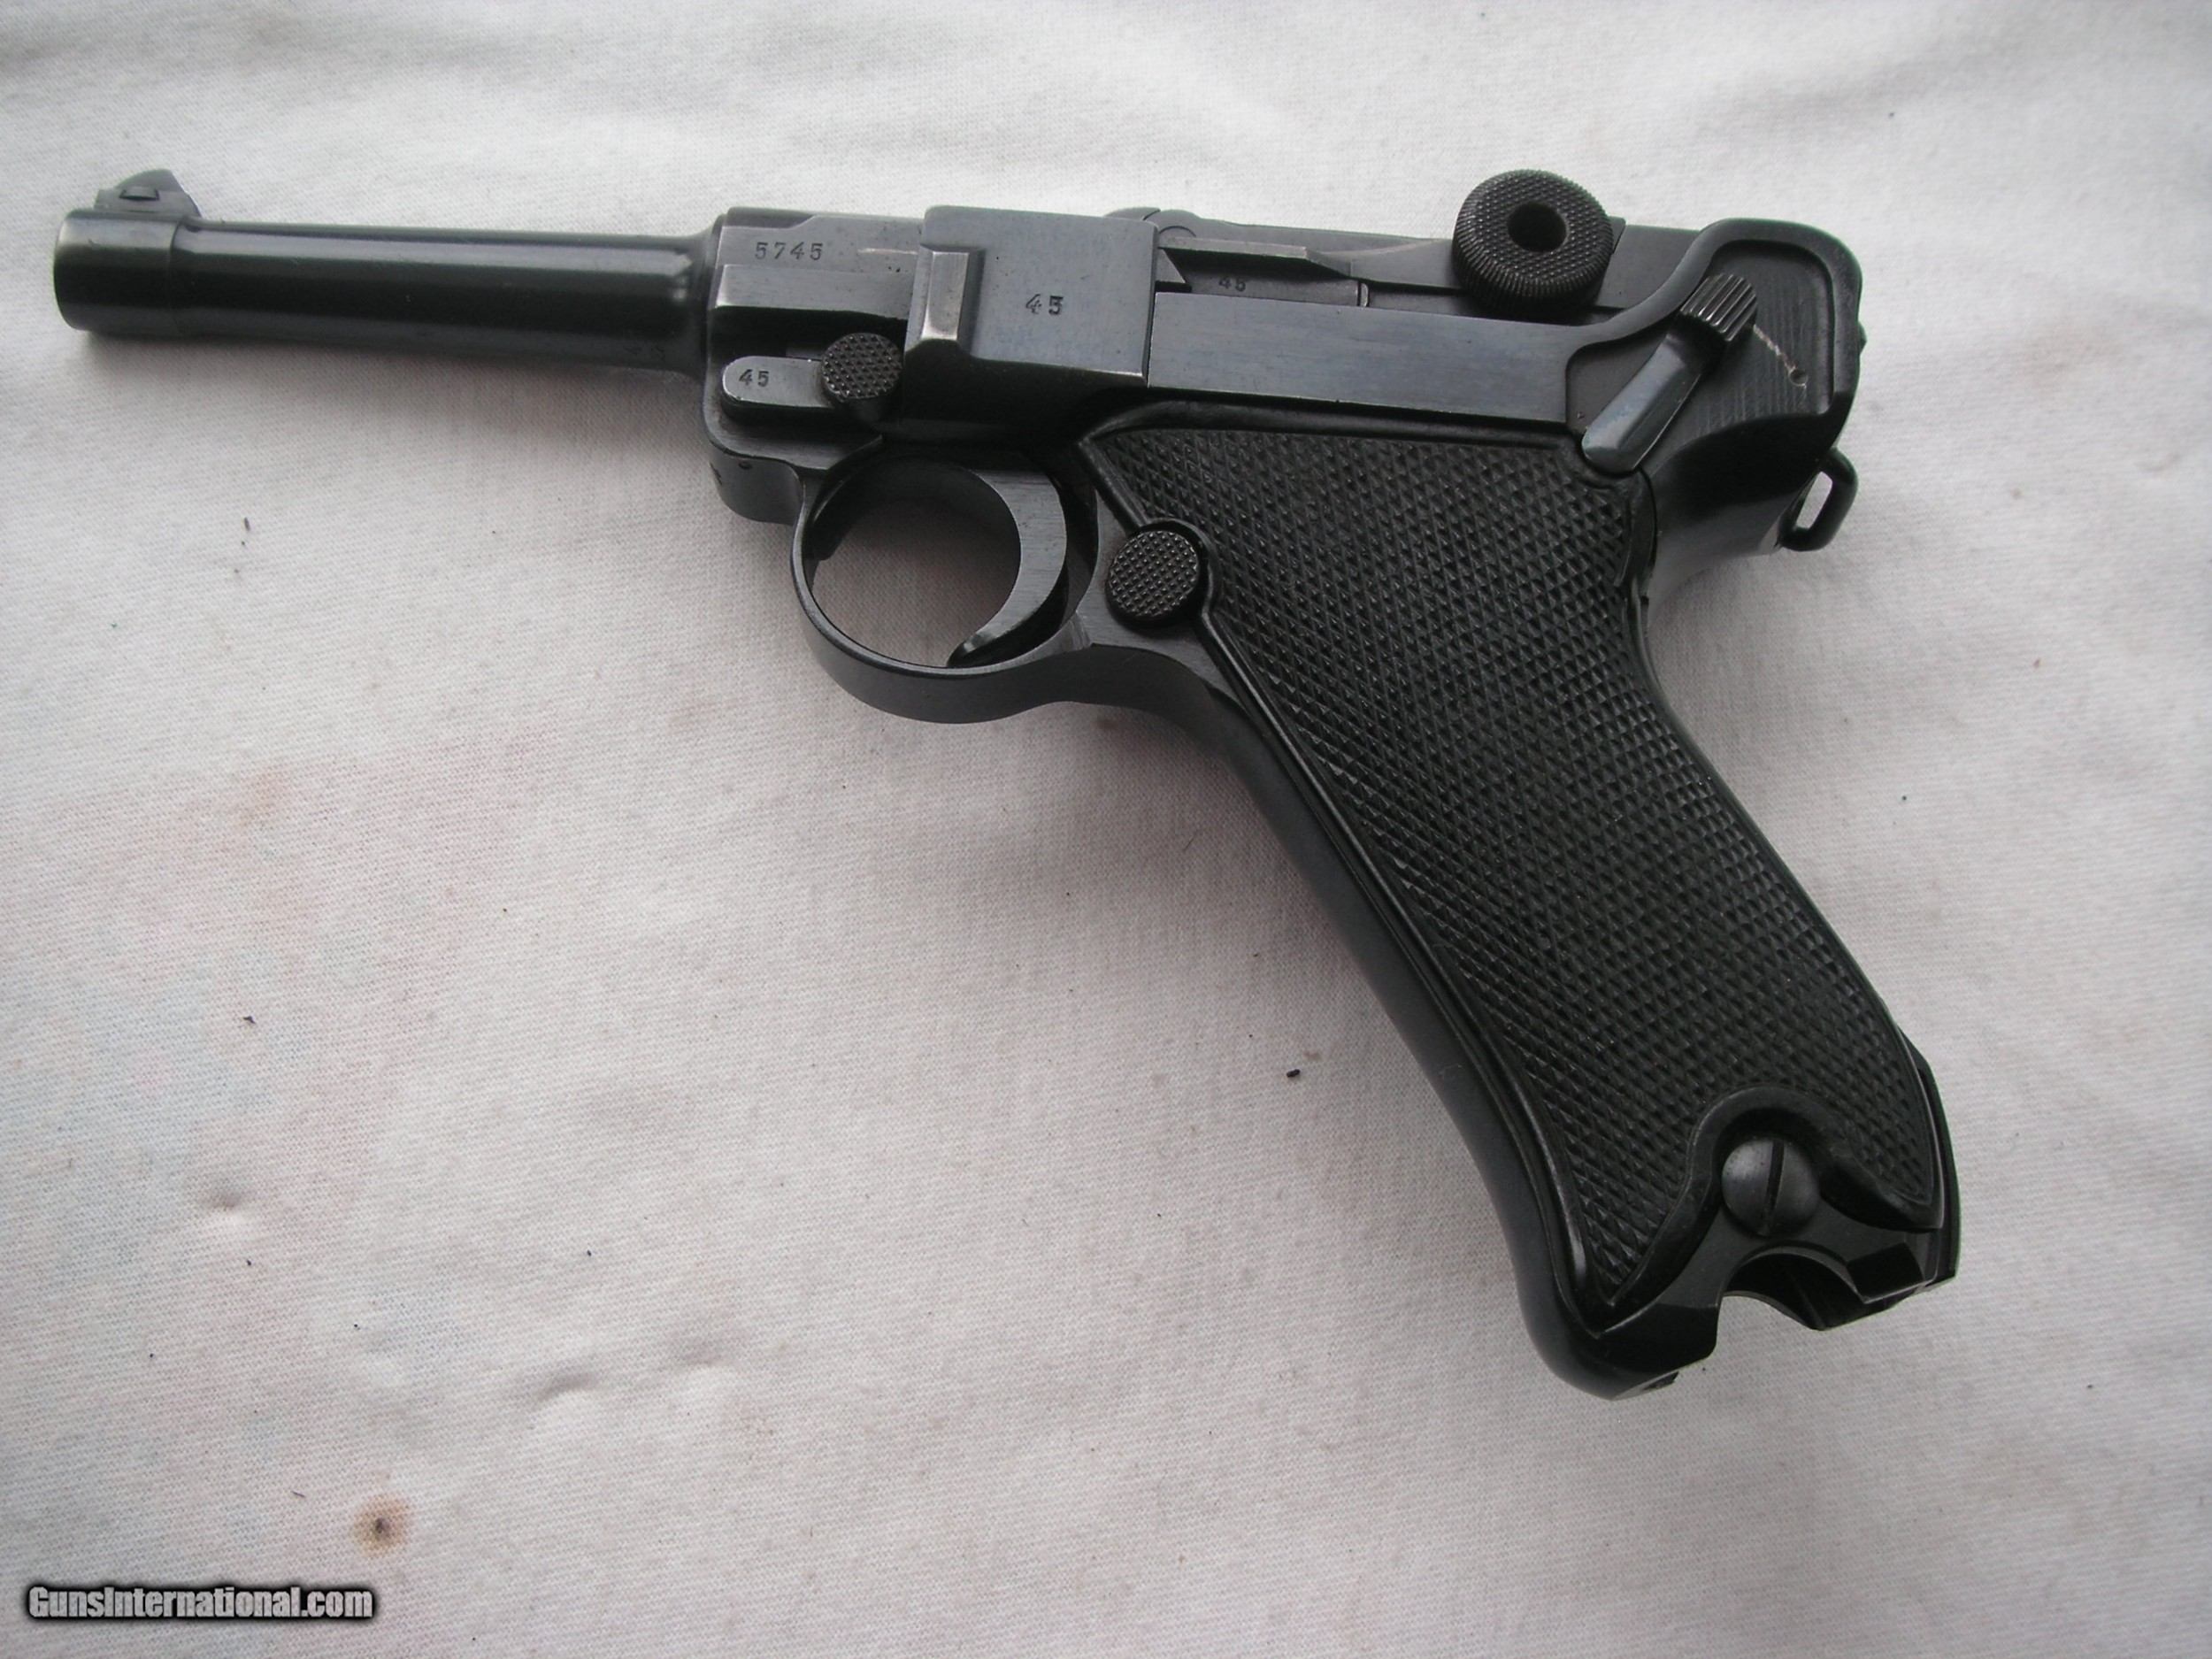 Imperial lugers serial number